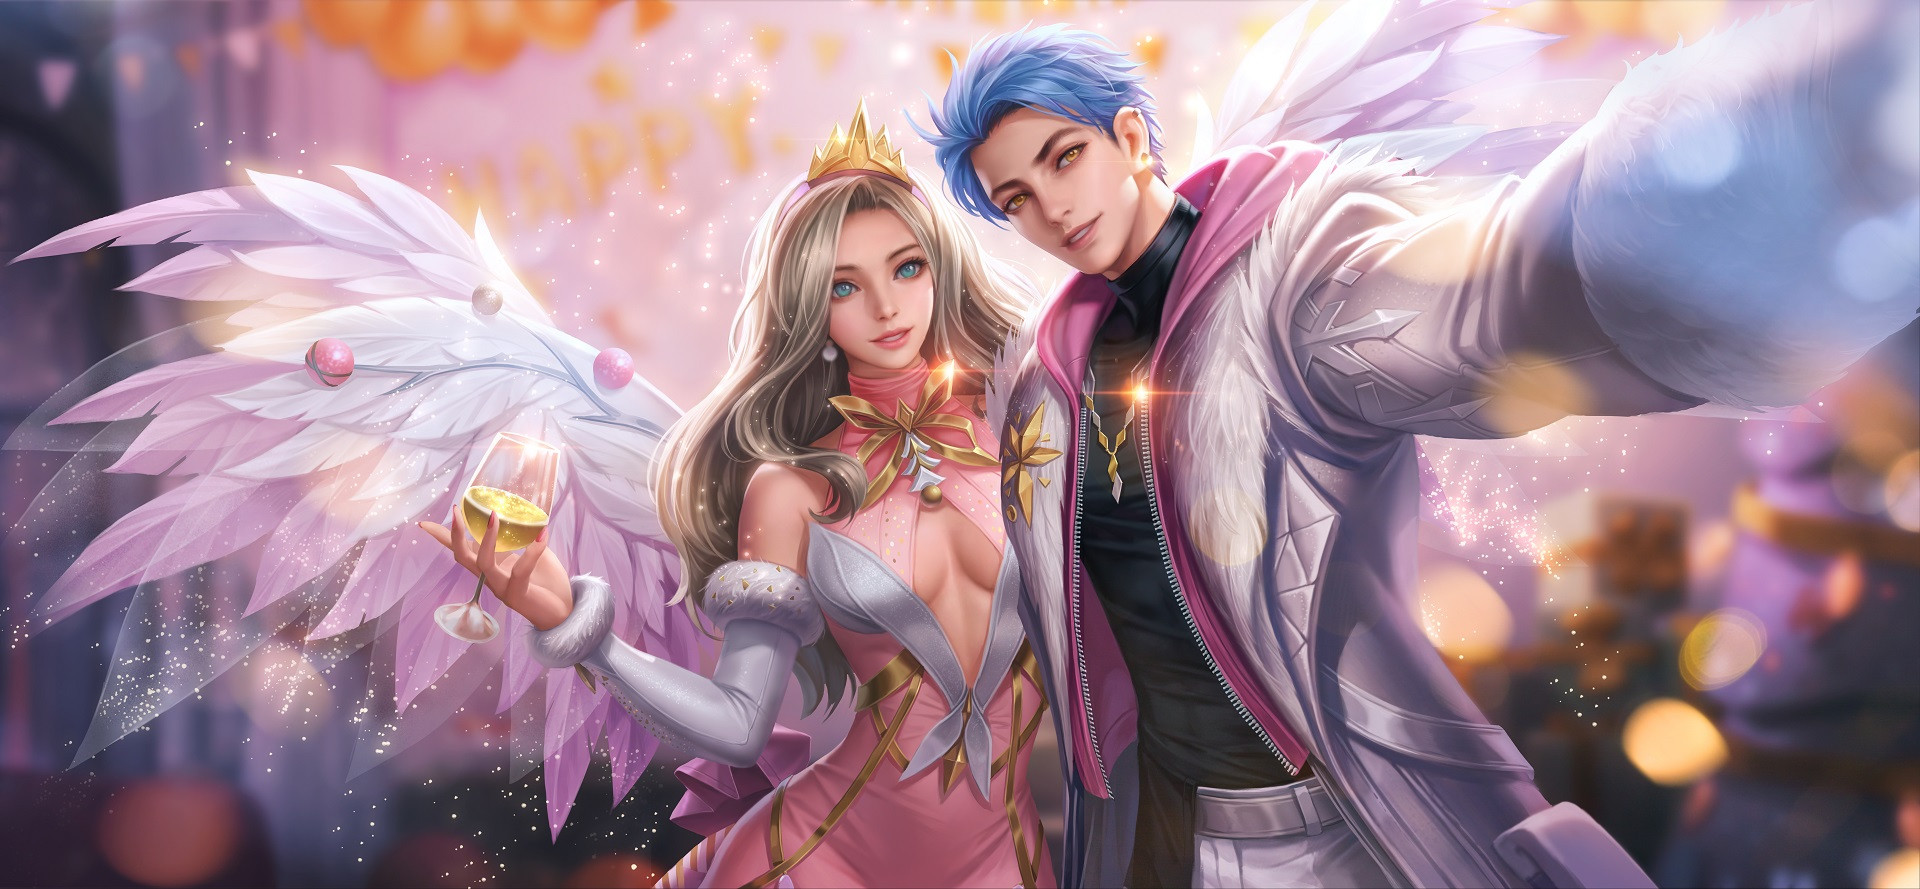 Arena Of Valor AOV Video Games Video Game Art Video Game Man Video Game Girls Video Game Characters  1920x889